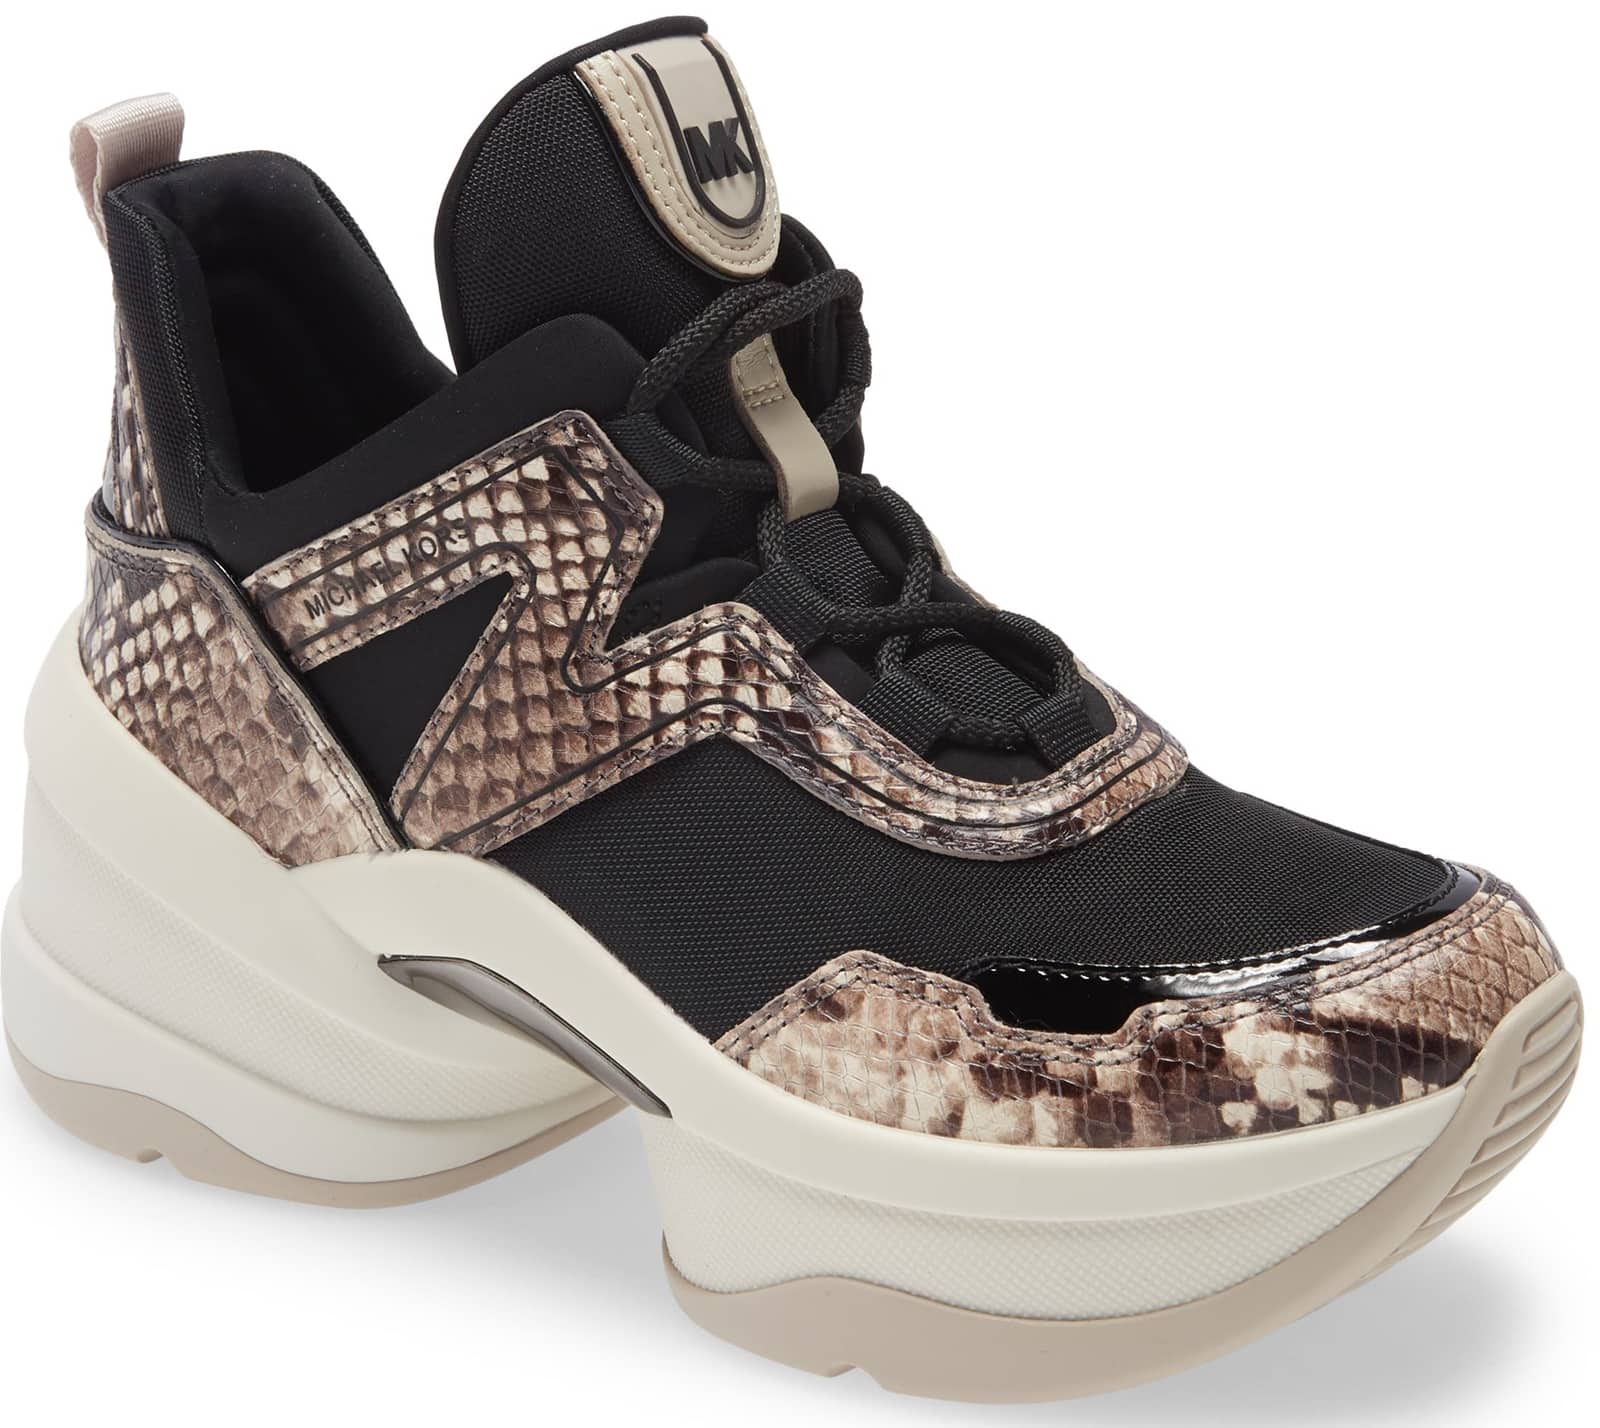 A futuristic sole brings striking height and retro-inspired flair to a sporty sneaker featuring a mixed-media design